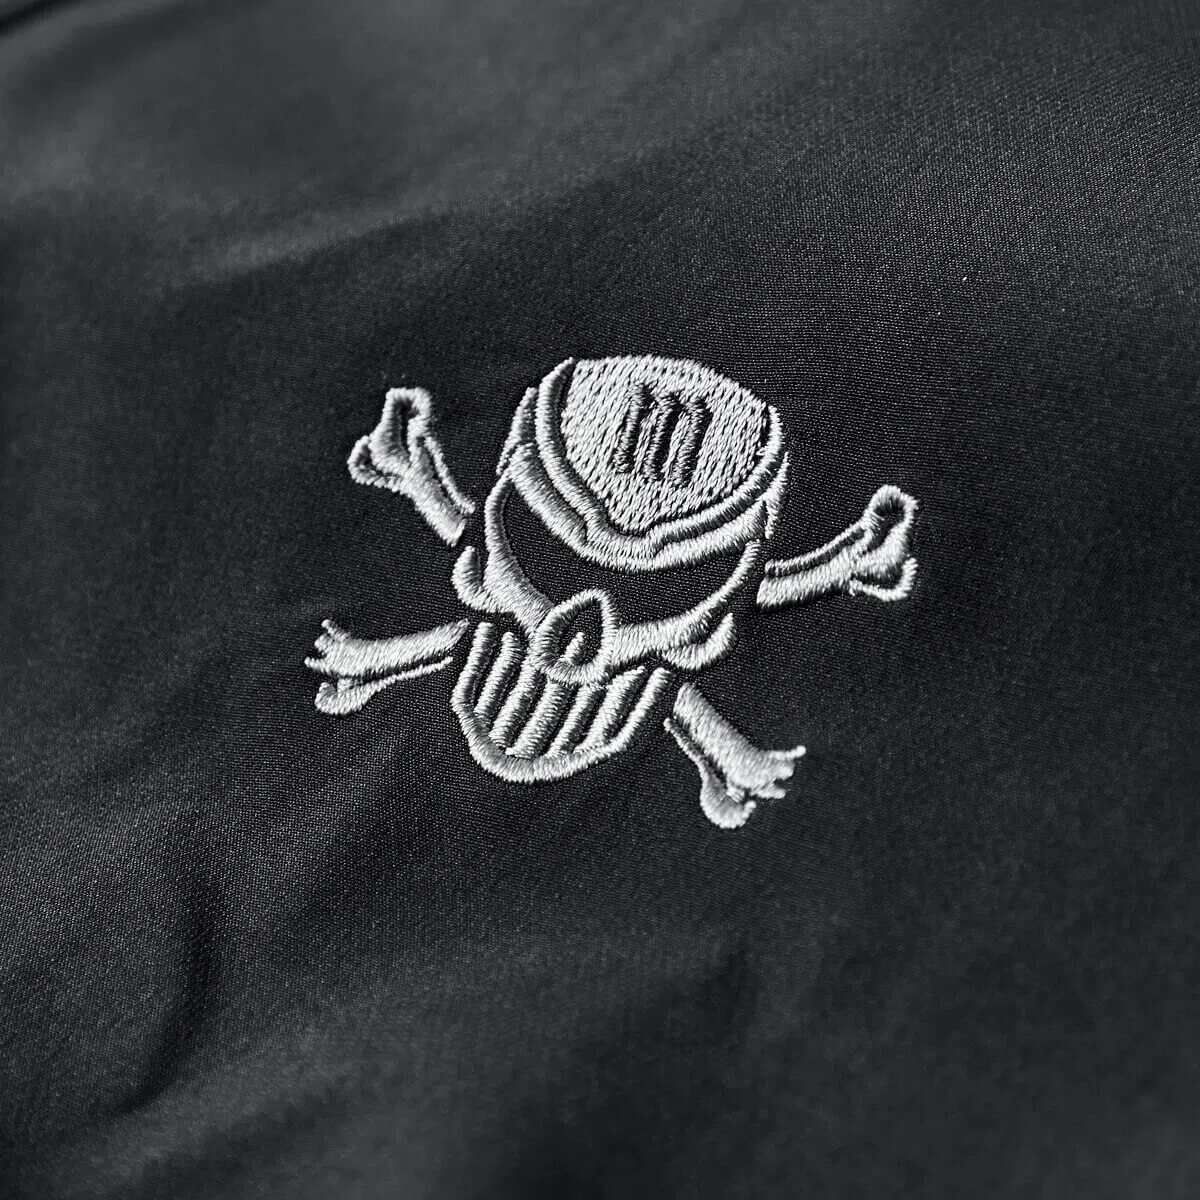 Skull Embroidery Bomber Jacket for Men / Military Male Black Jacket with Zipper - HARD'N'HEAVY